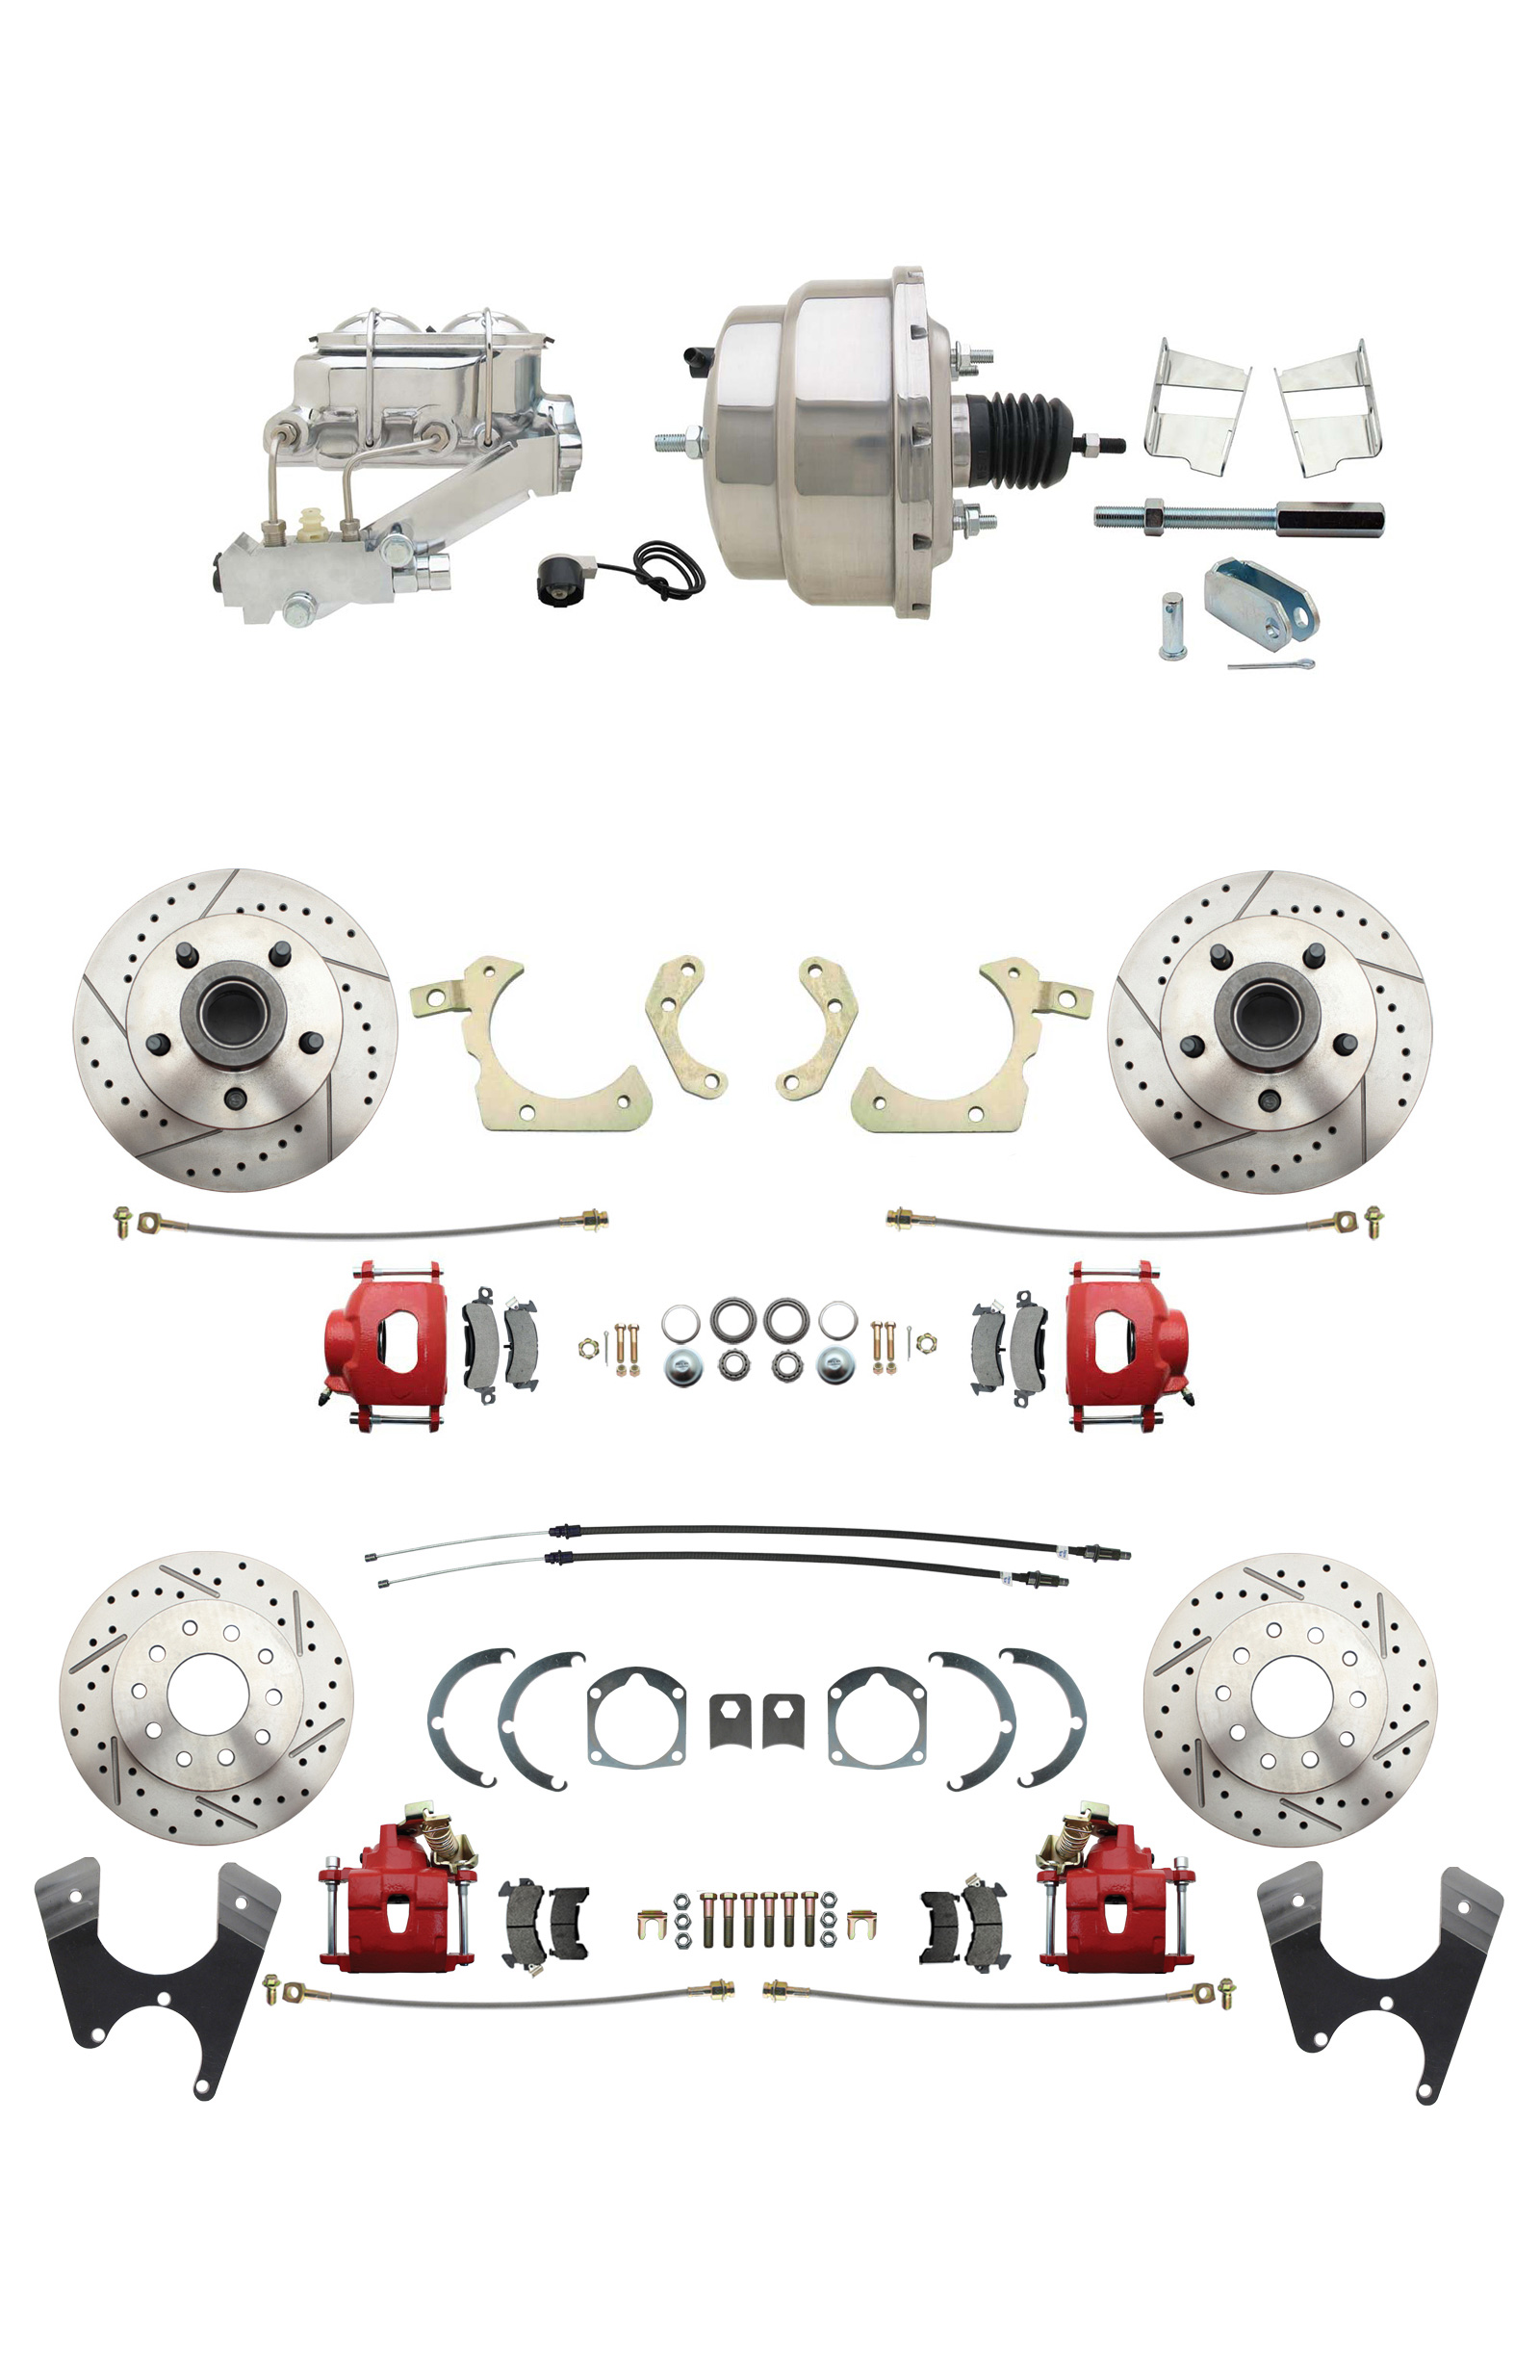 1959-1964 GM Full Size Front & Rear Power Disc Brake Kit Red Powder Coated Calipers Drilled/Slotted Rotors (Impala, Bel Air, Biscayne) & 8 Dual Stainless Steel Booster Conversion Kit W/ Chrome Master Cylinder Left Mount